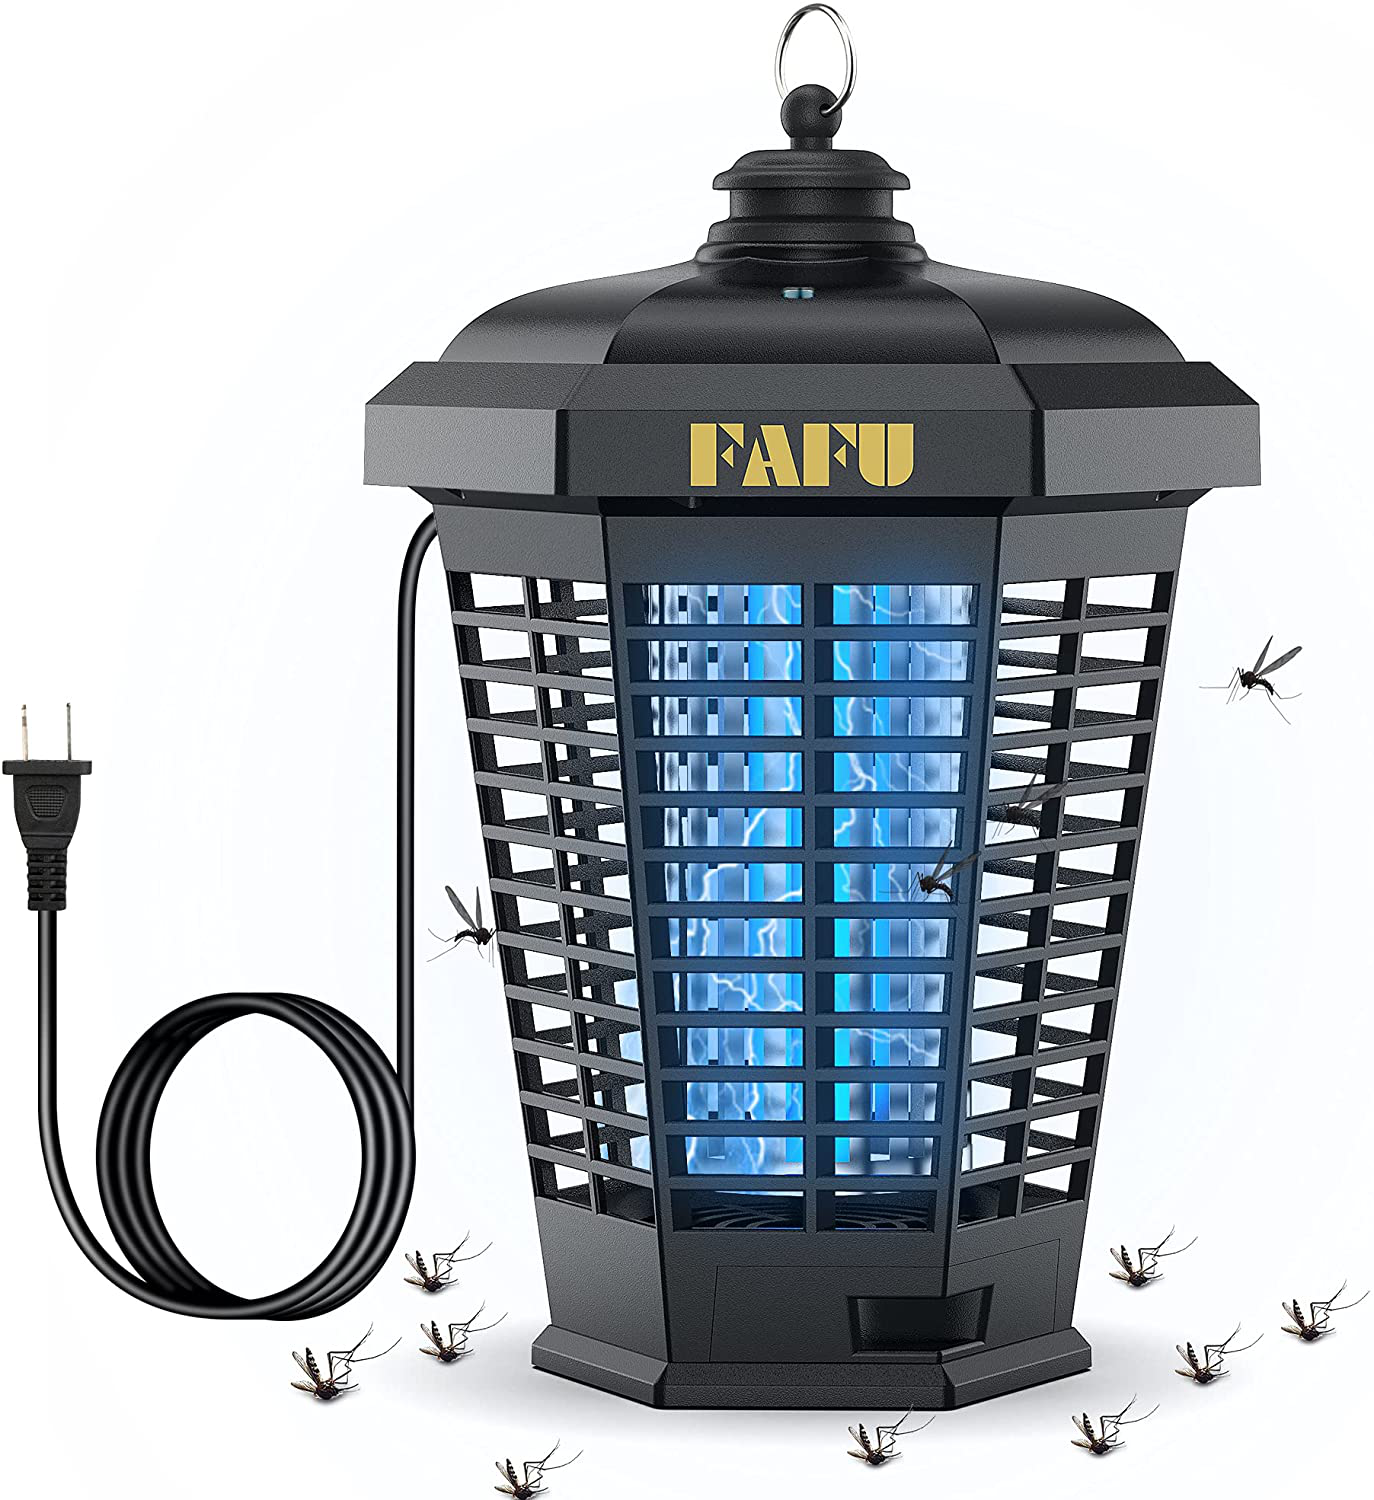 Bug Zapper, Outdoor Mosquito Killer, 18W 4200V High Powered Electronic Mosquito Zapper Fly Zapper,Insect Fly Trap Indoor, Mosquito Traps for Garden Patio, Backyard,Home